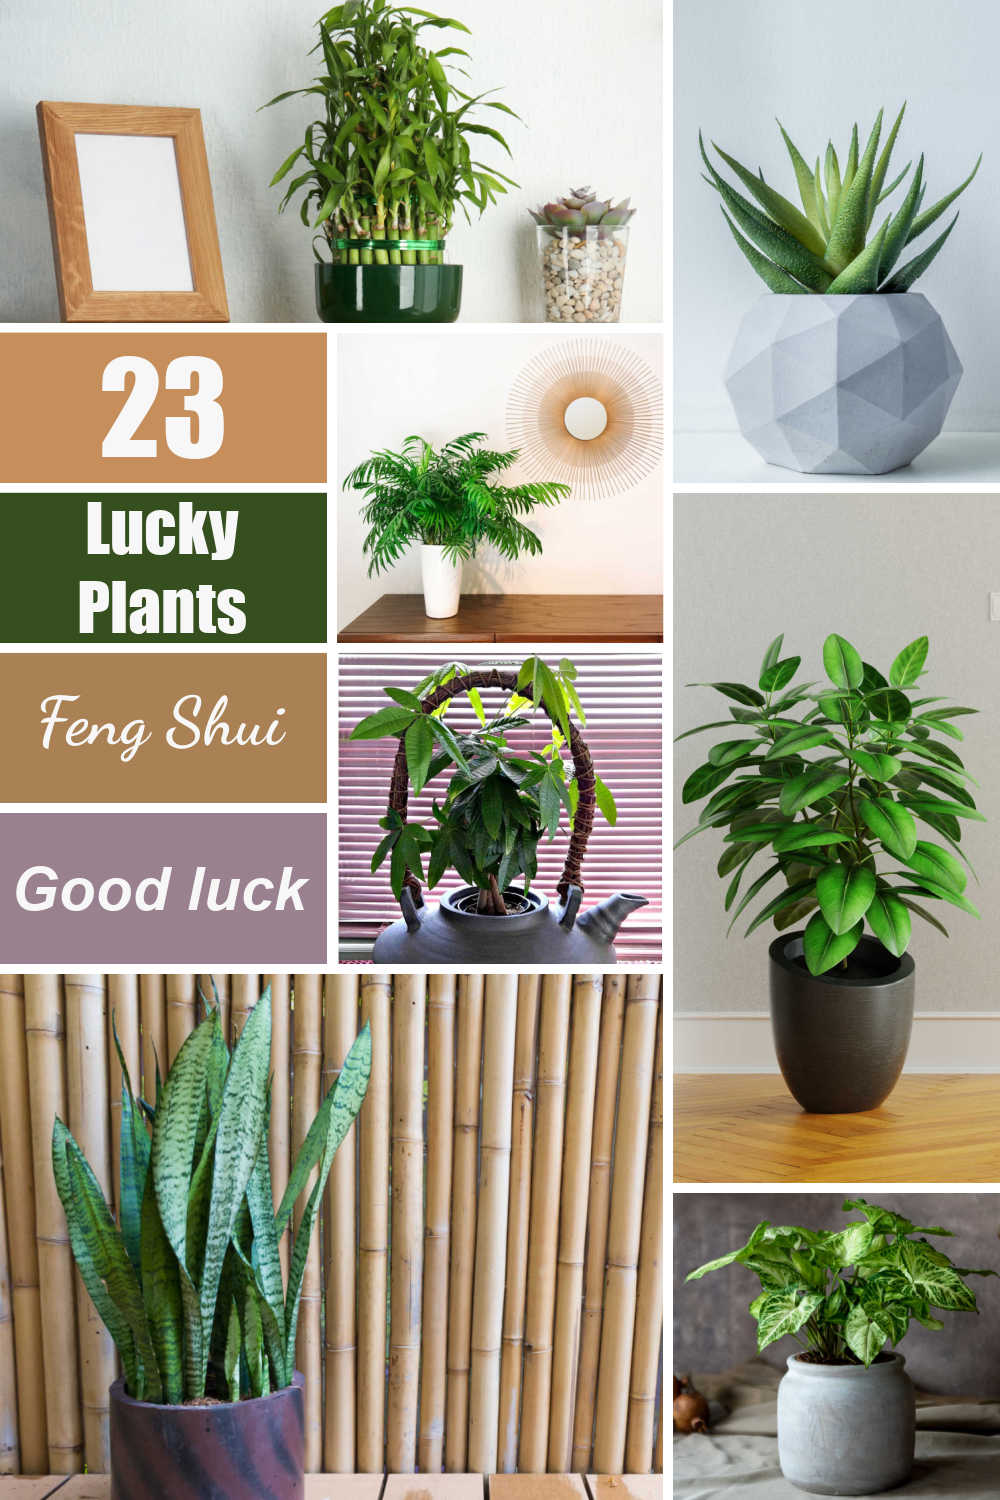 What are the best plants for good luck in the House?